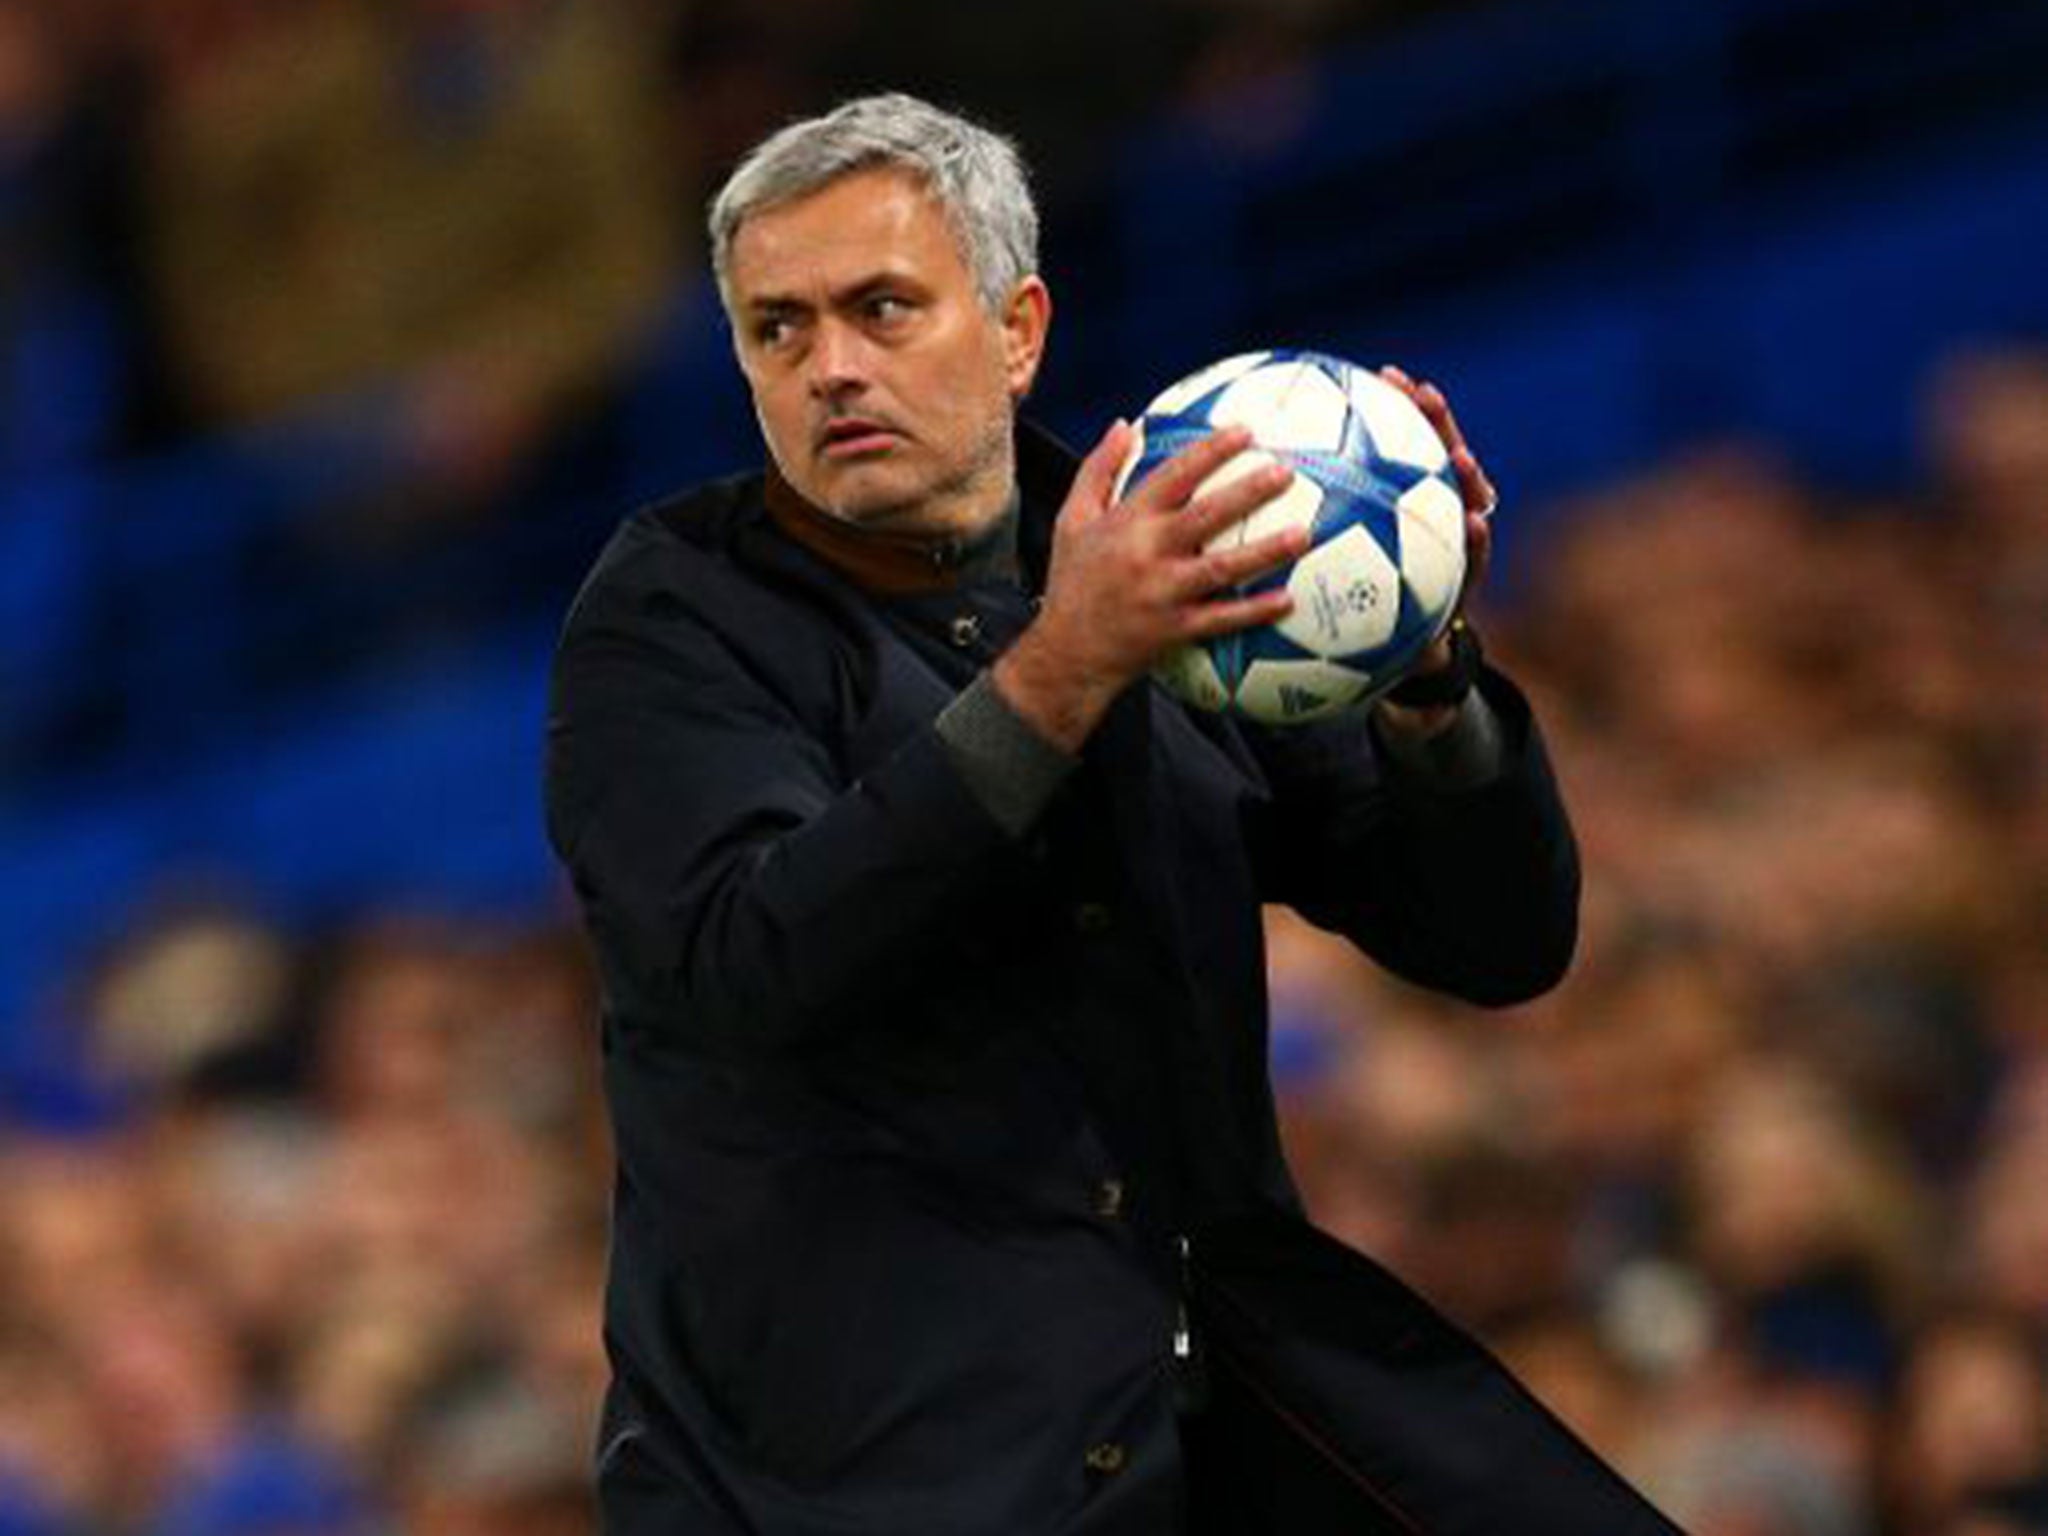 Jose Mourinho ran up a whopping crimesheet during his second spell with Chelsea